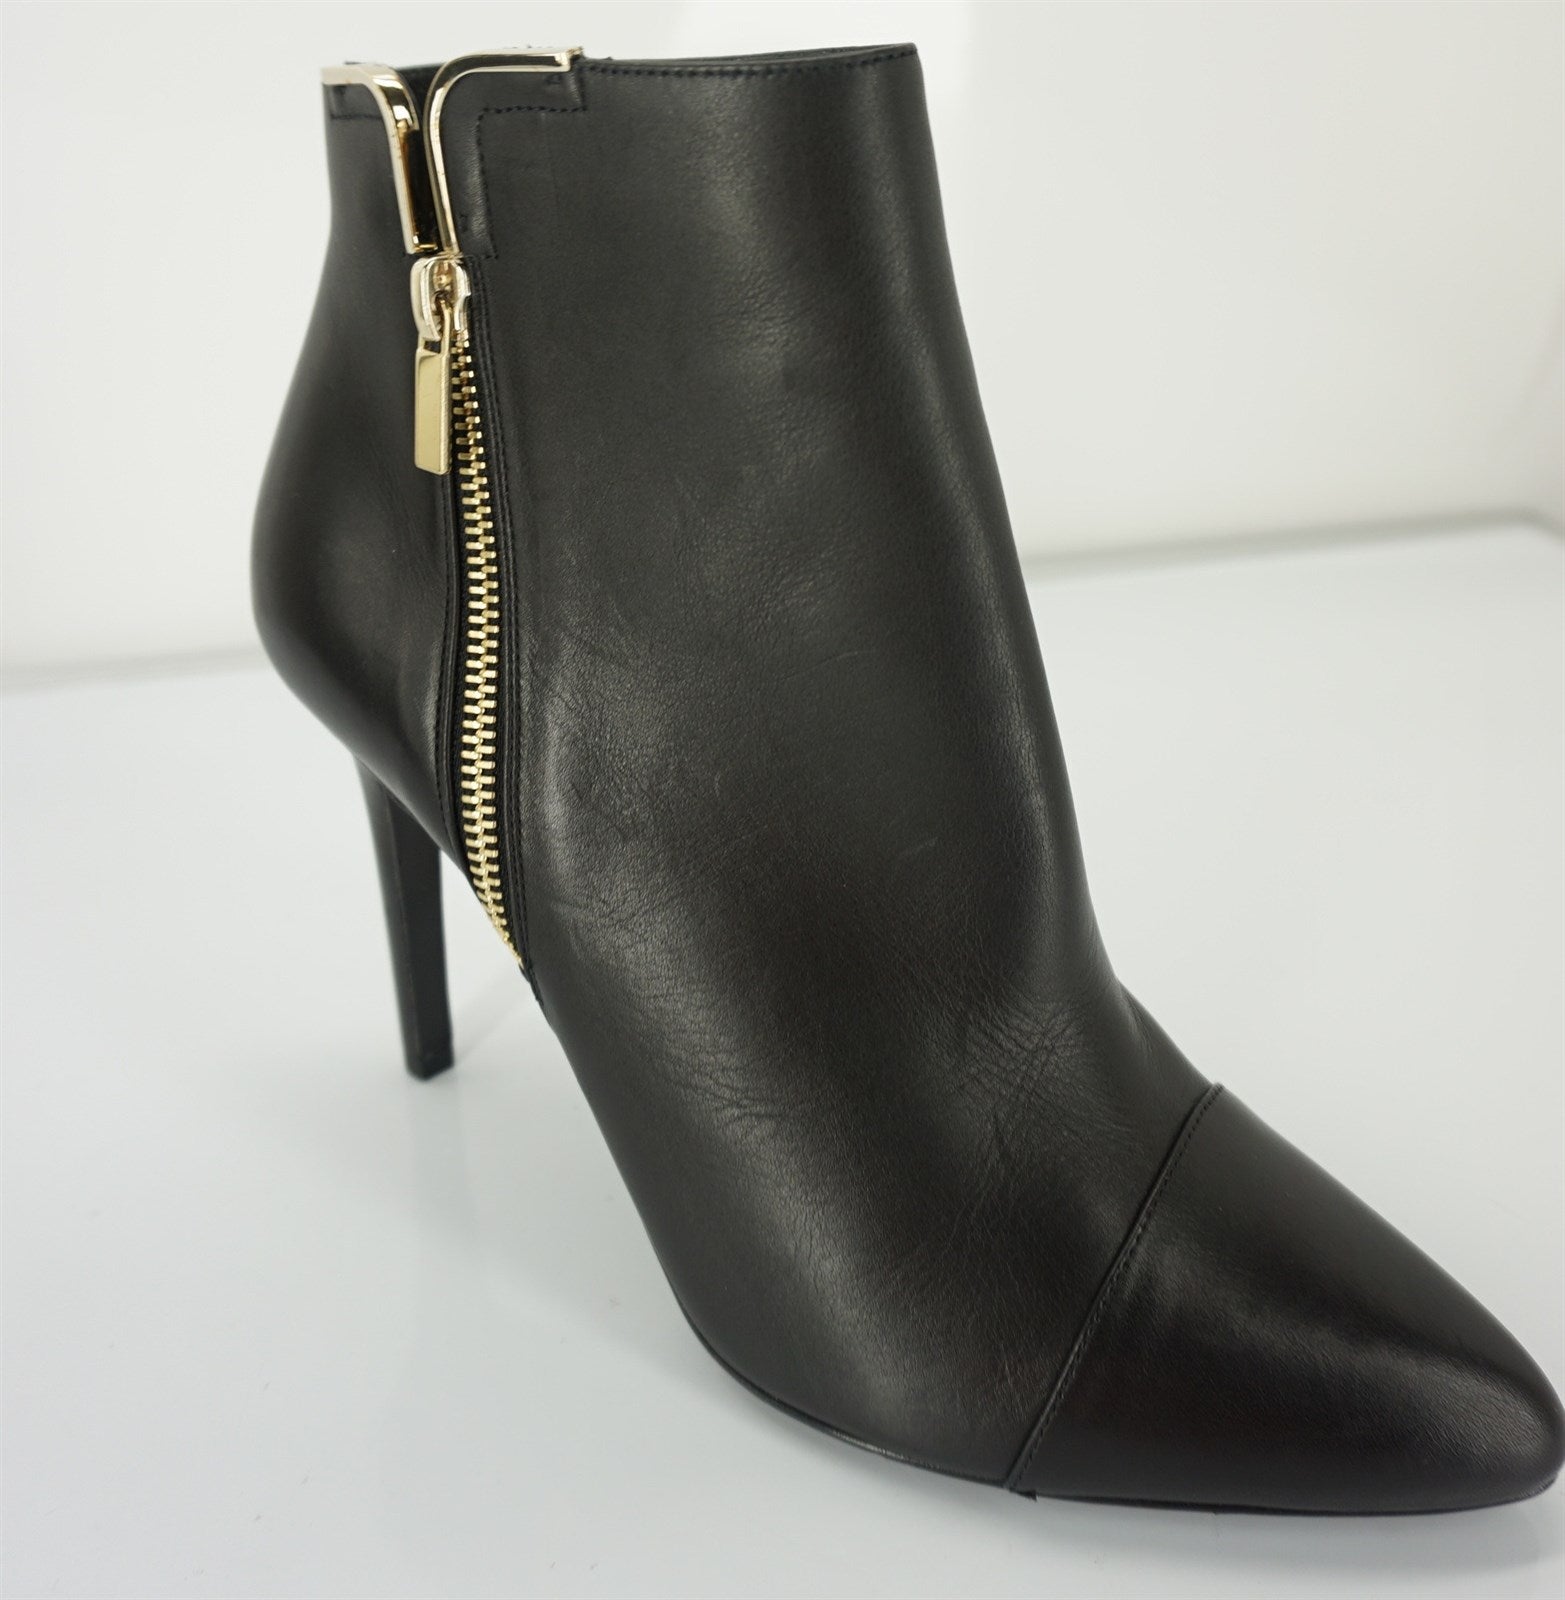 Lanvin Black Leather Pointy Toe Gold Trim High Heels Ankle Boots SZ 39 New $890